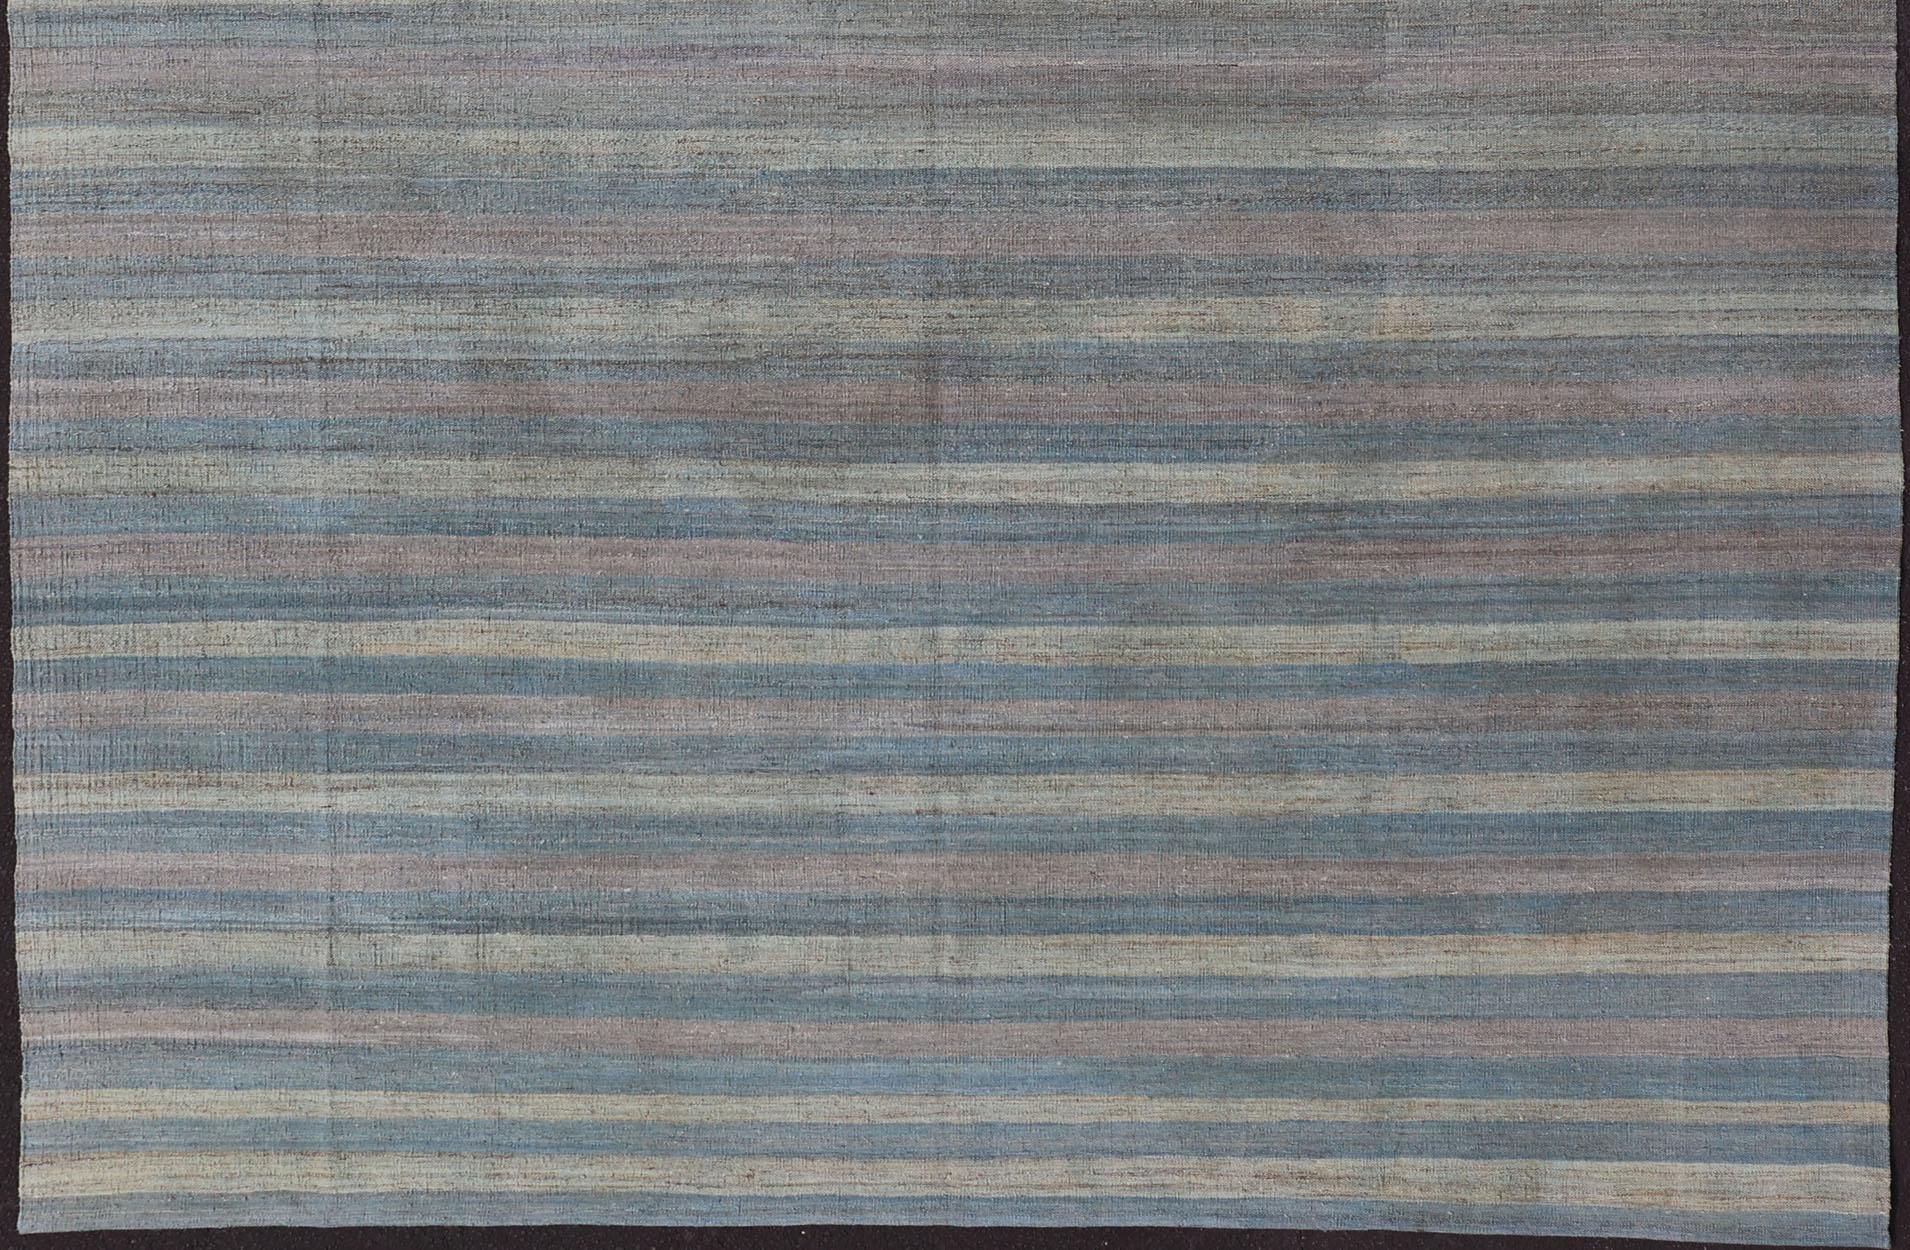 Flat-weave Kilim rug with stripes with modern design in shades of blue, taupe, gray and green, Keivan Woven Arts / rug AFG-87, country of origin / type: Afghanistan / Kilim

This playful piece features a stripe design that evokes casual and easy